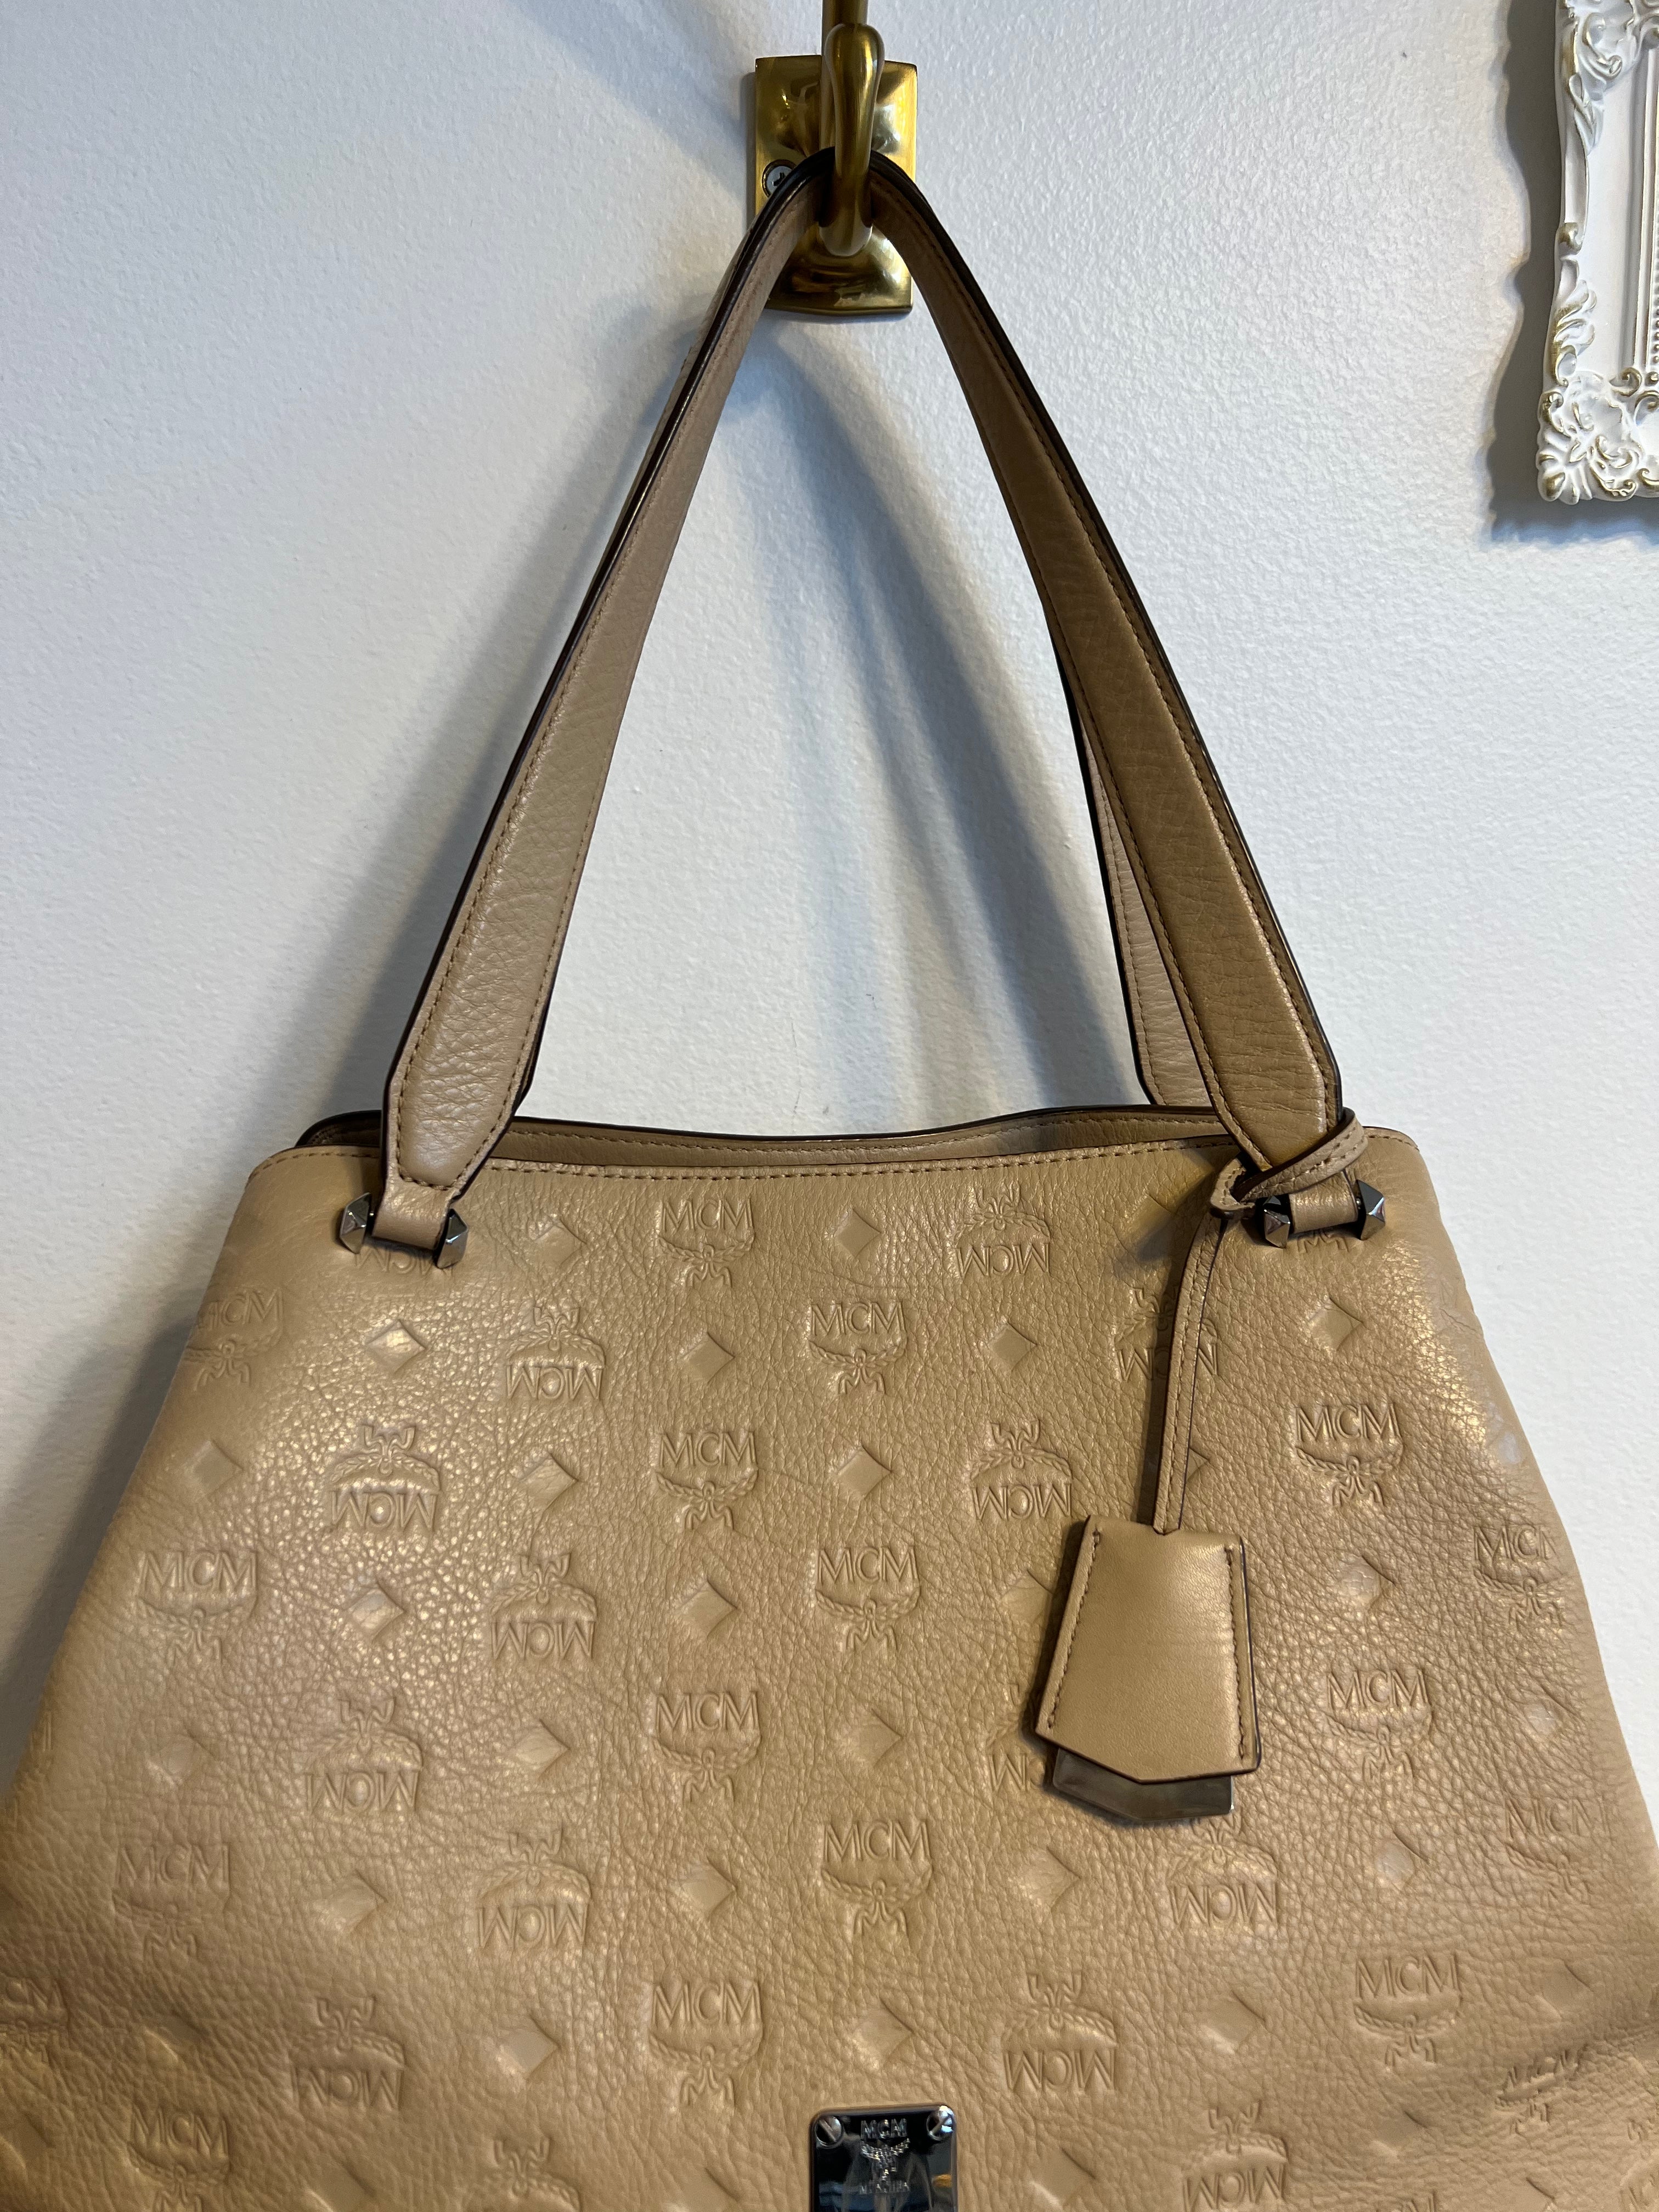 AUTHENTIC MCM BAG for Sale in Apple Valley, CA - OfferUp